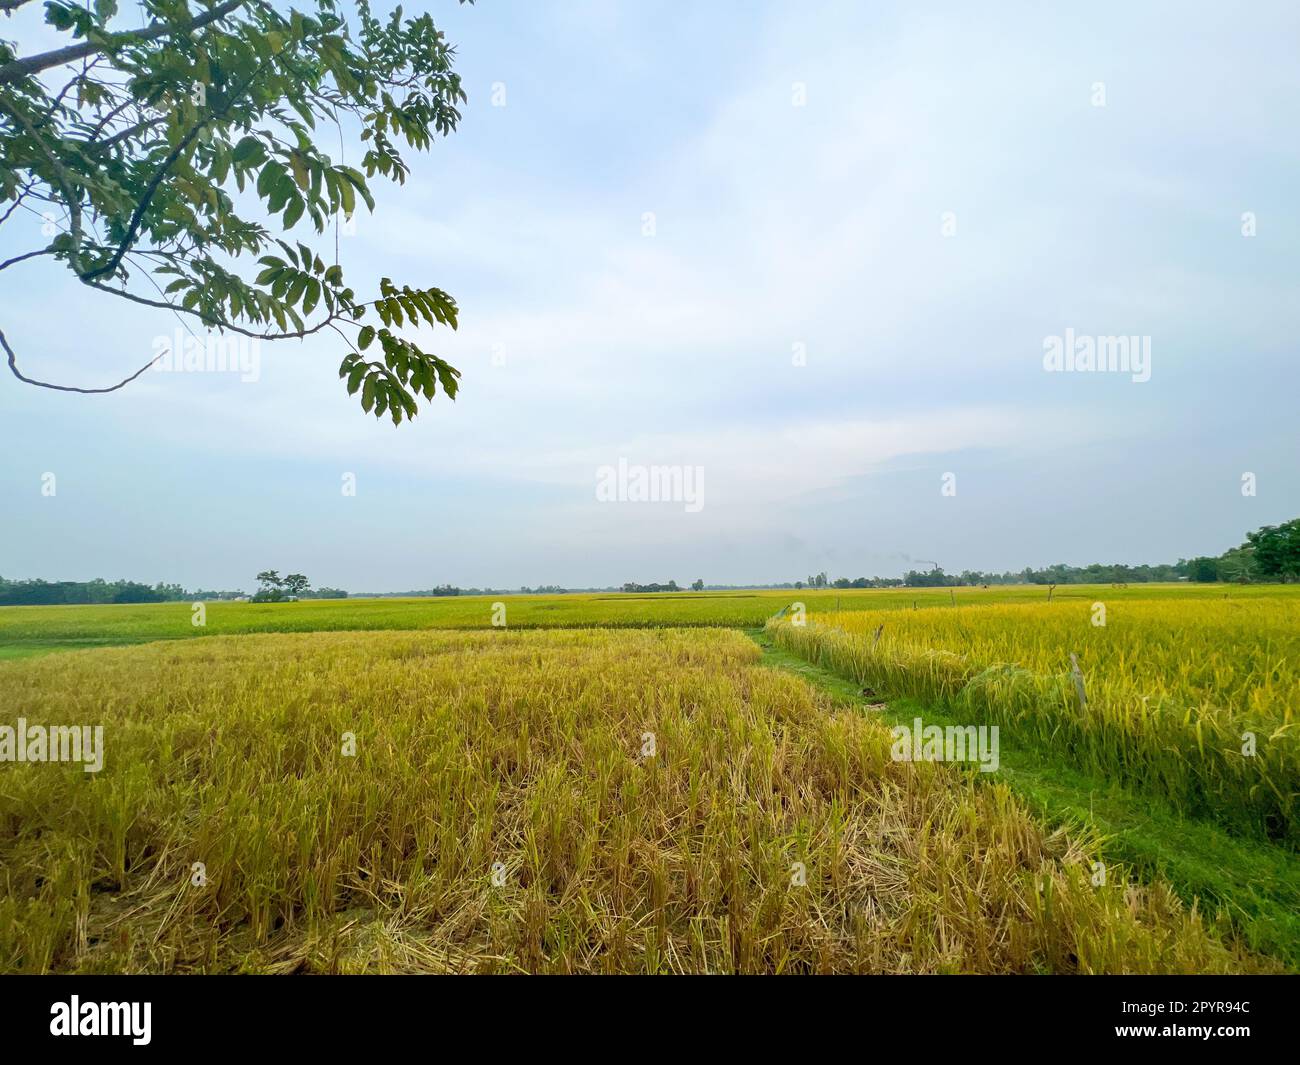 Rice field is seen in Bangladesh. Stock Photo